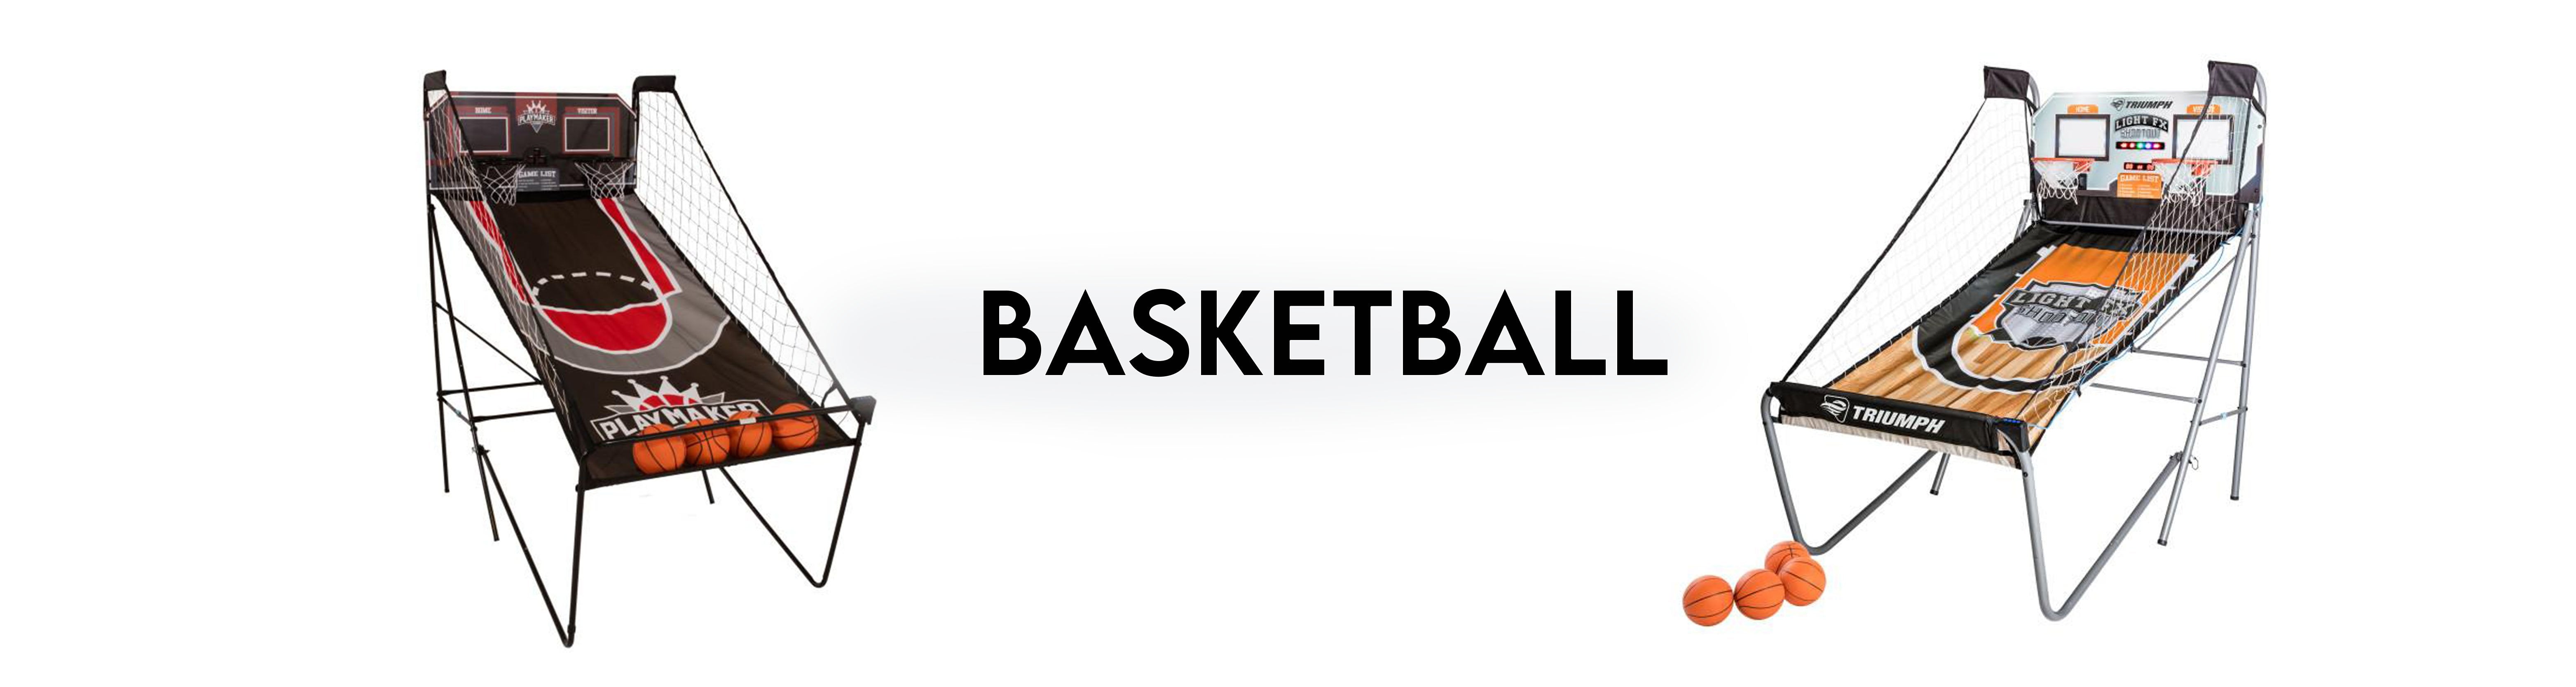 Basketball - Recreation Outfitters